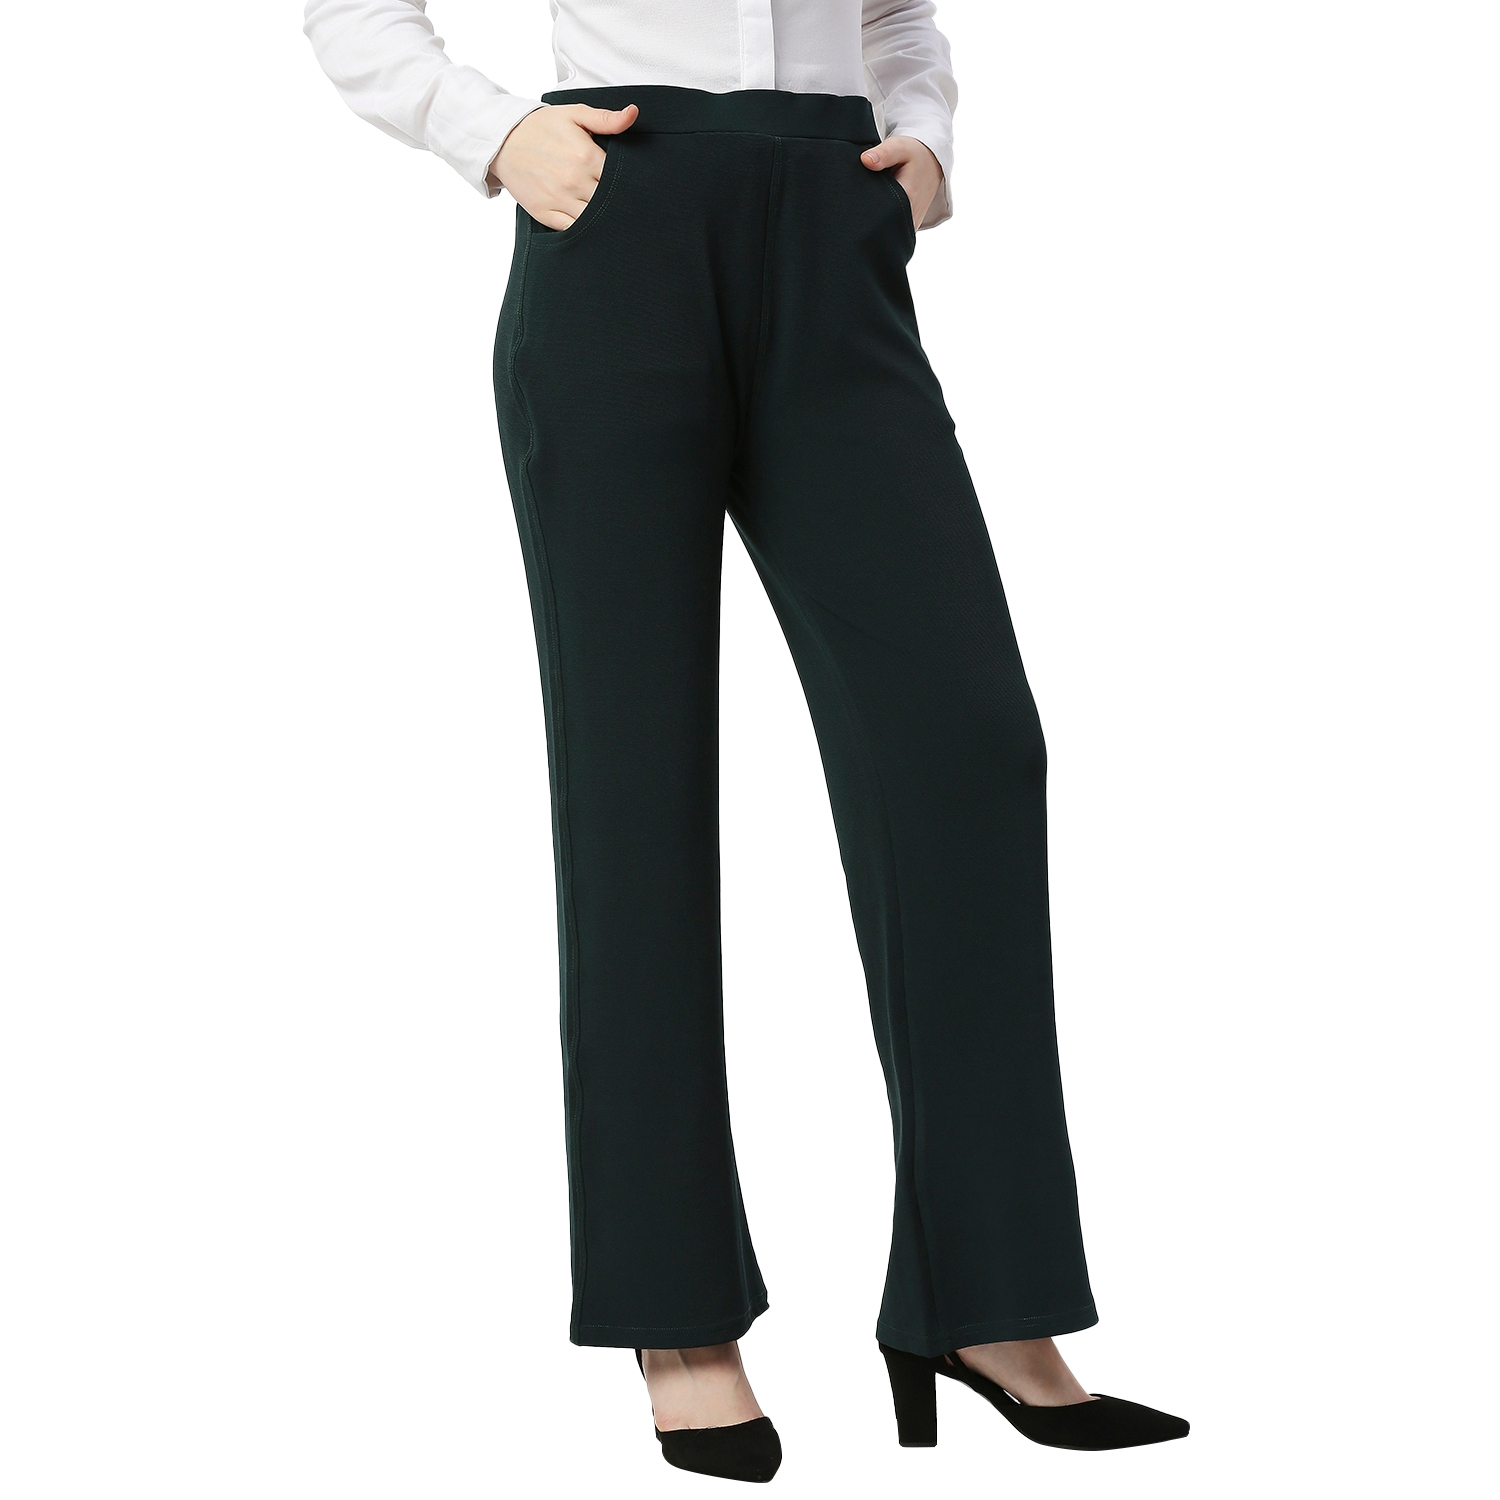 Mansion Clothing - Bell Bottom Formal Pant - Black Buy Online -  https://shorturl.at/bsL68 Pro Code - LP 8808 Price - Rs 2690/= (Plus size  Rs.2890/=) Sizes - 30''-40'' Height - 38'' Color -